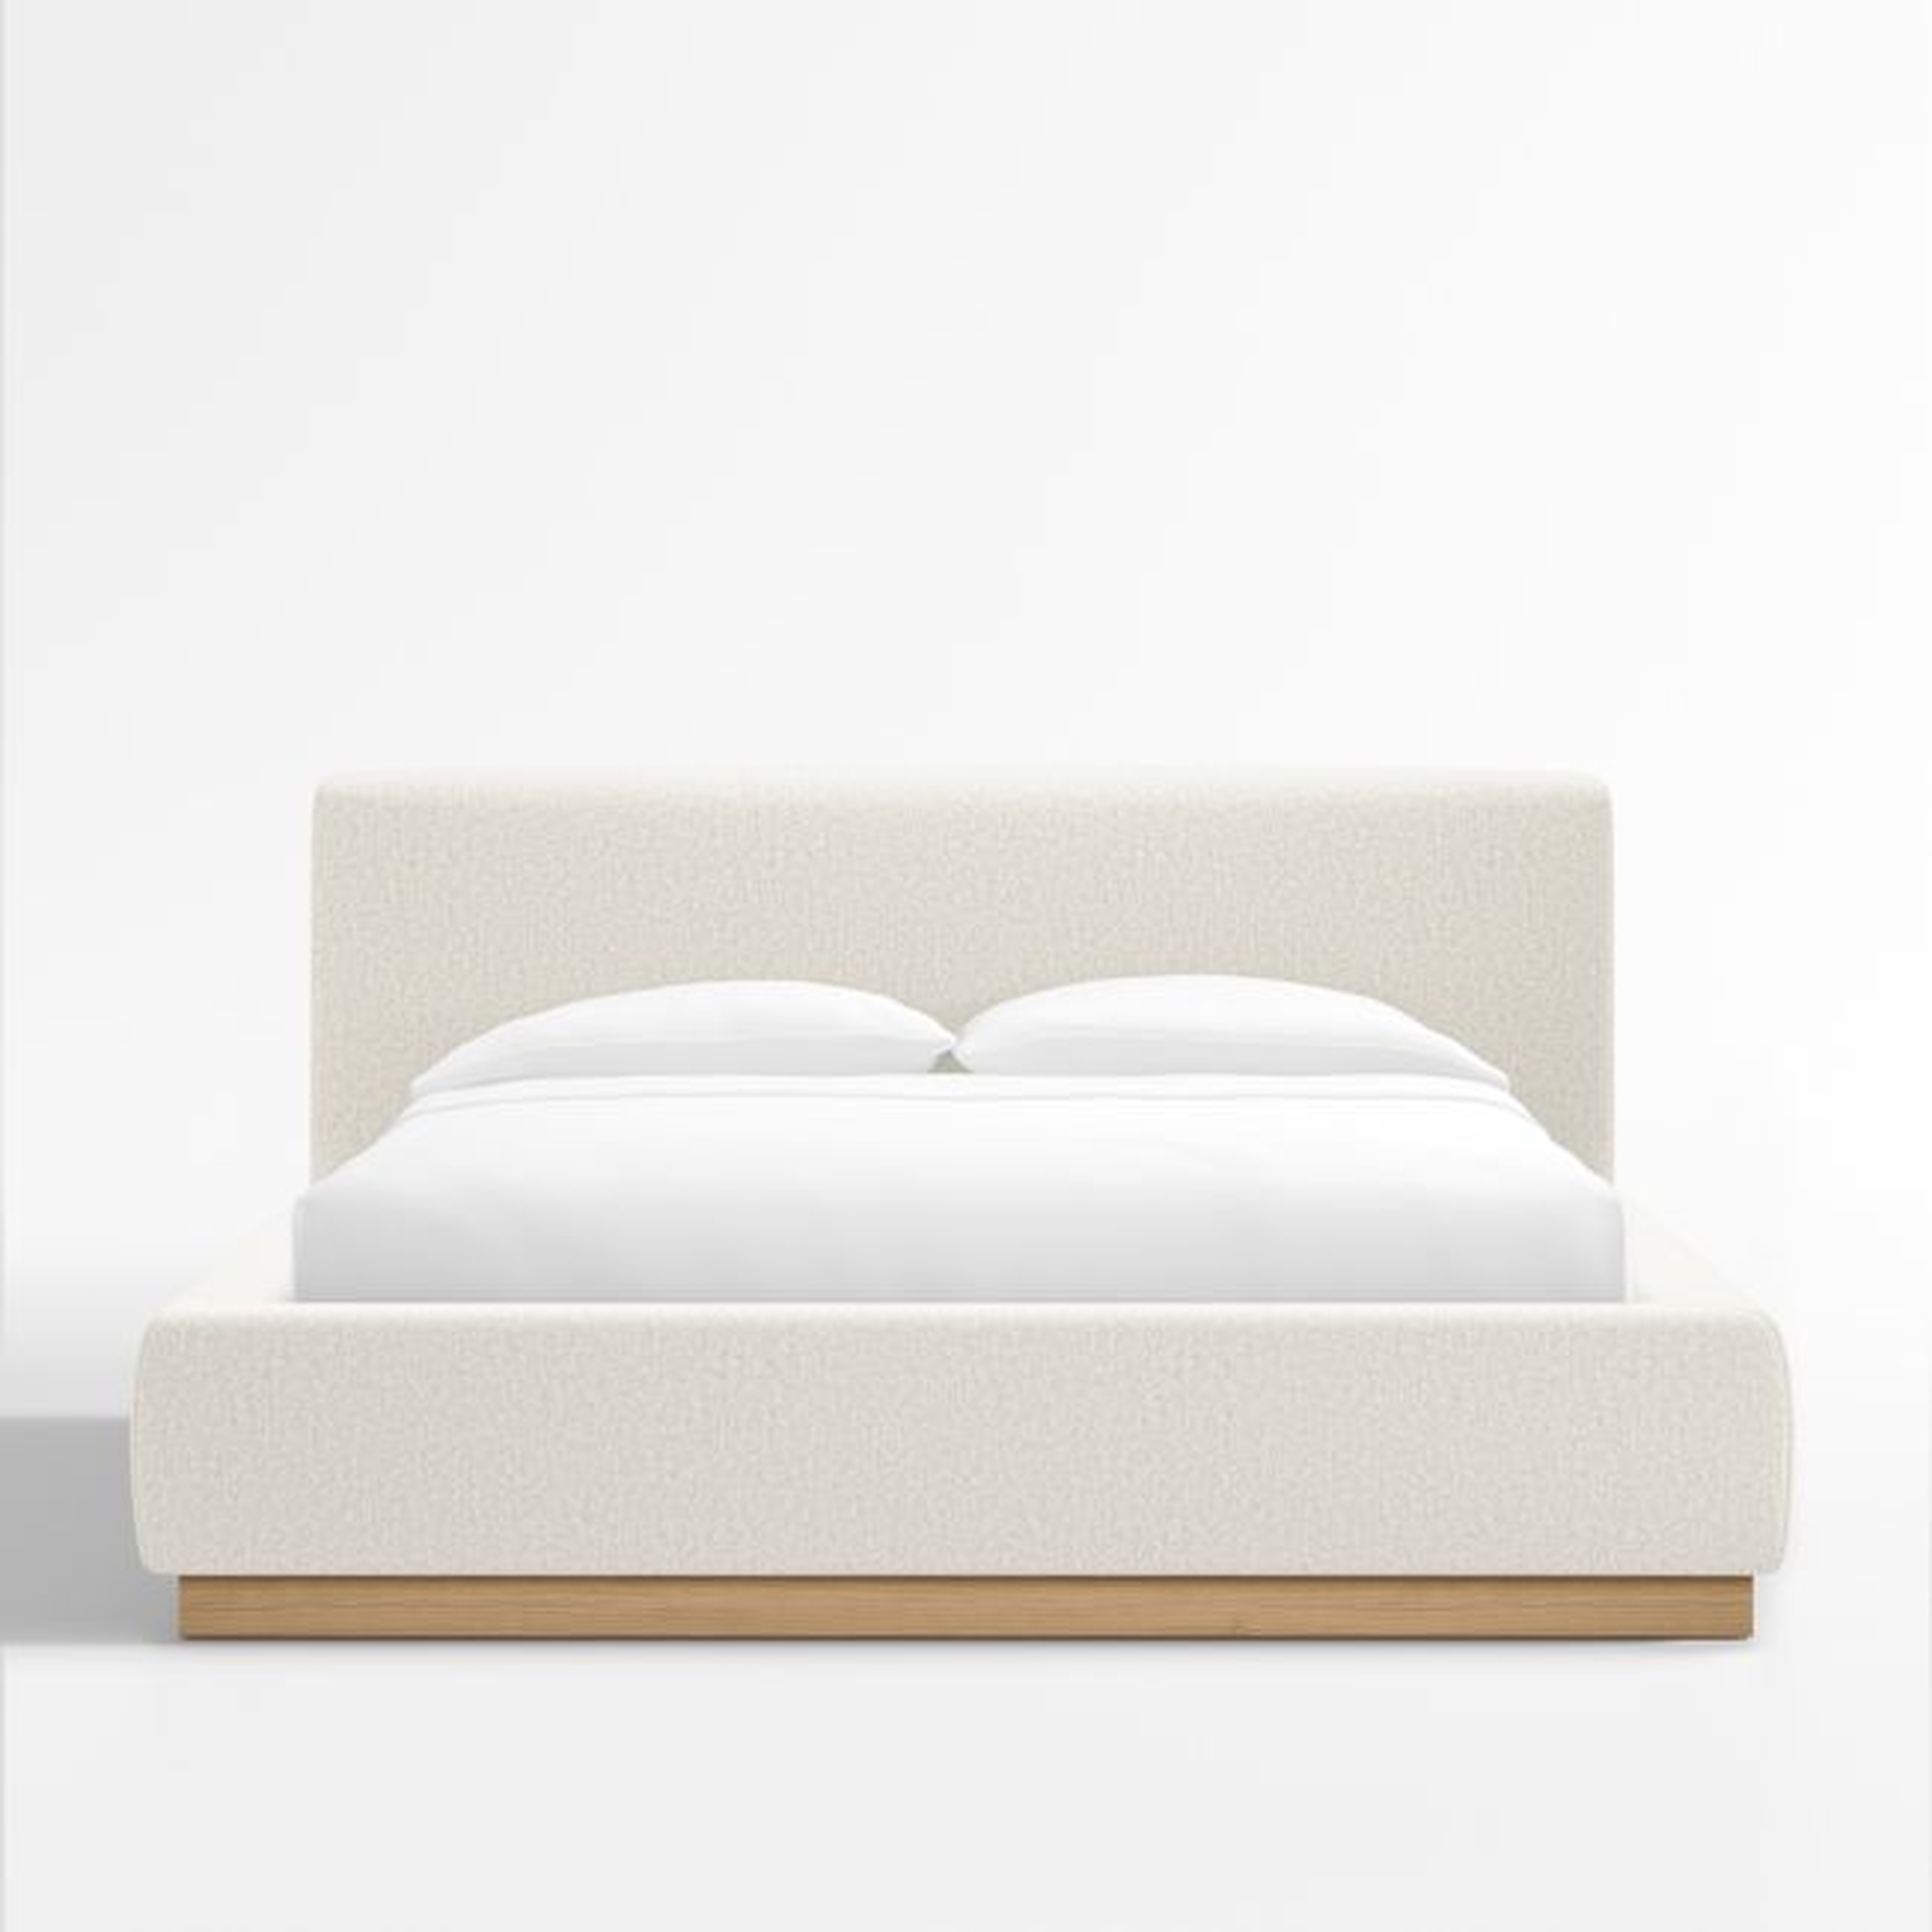 Gather White Upholstered Queen Bed - Crate and Barrel